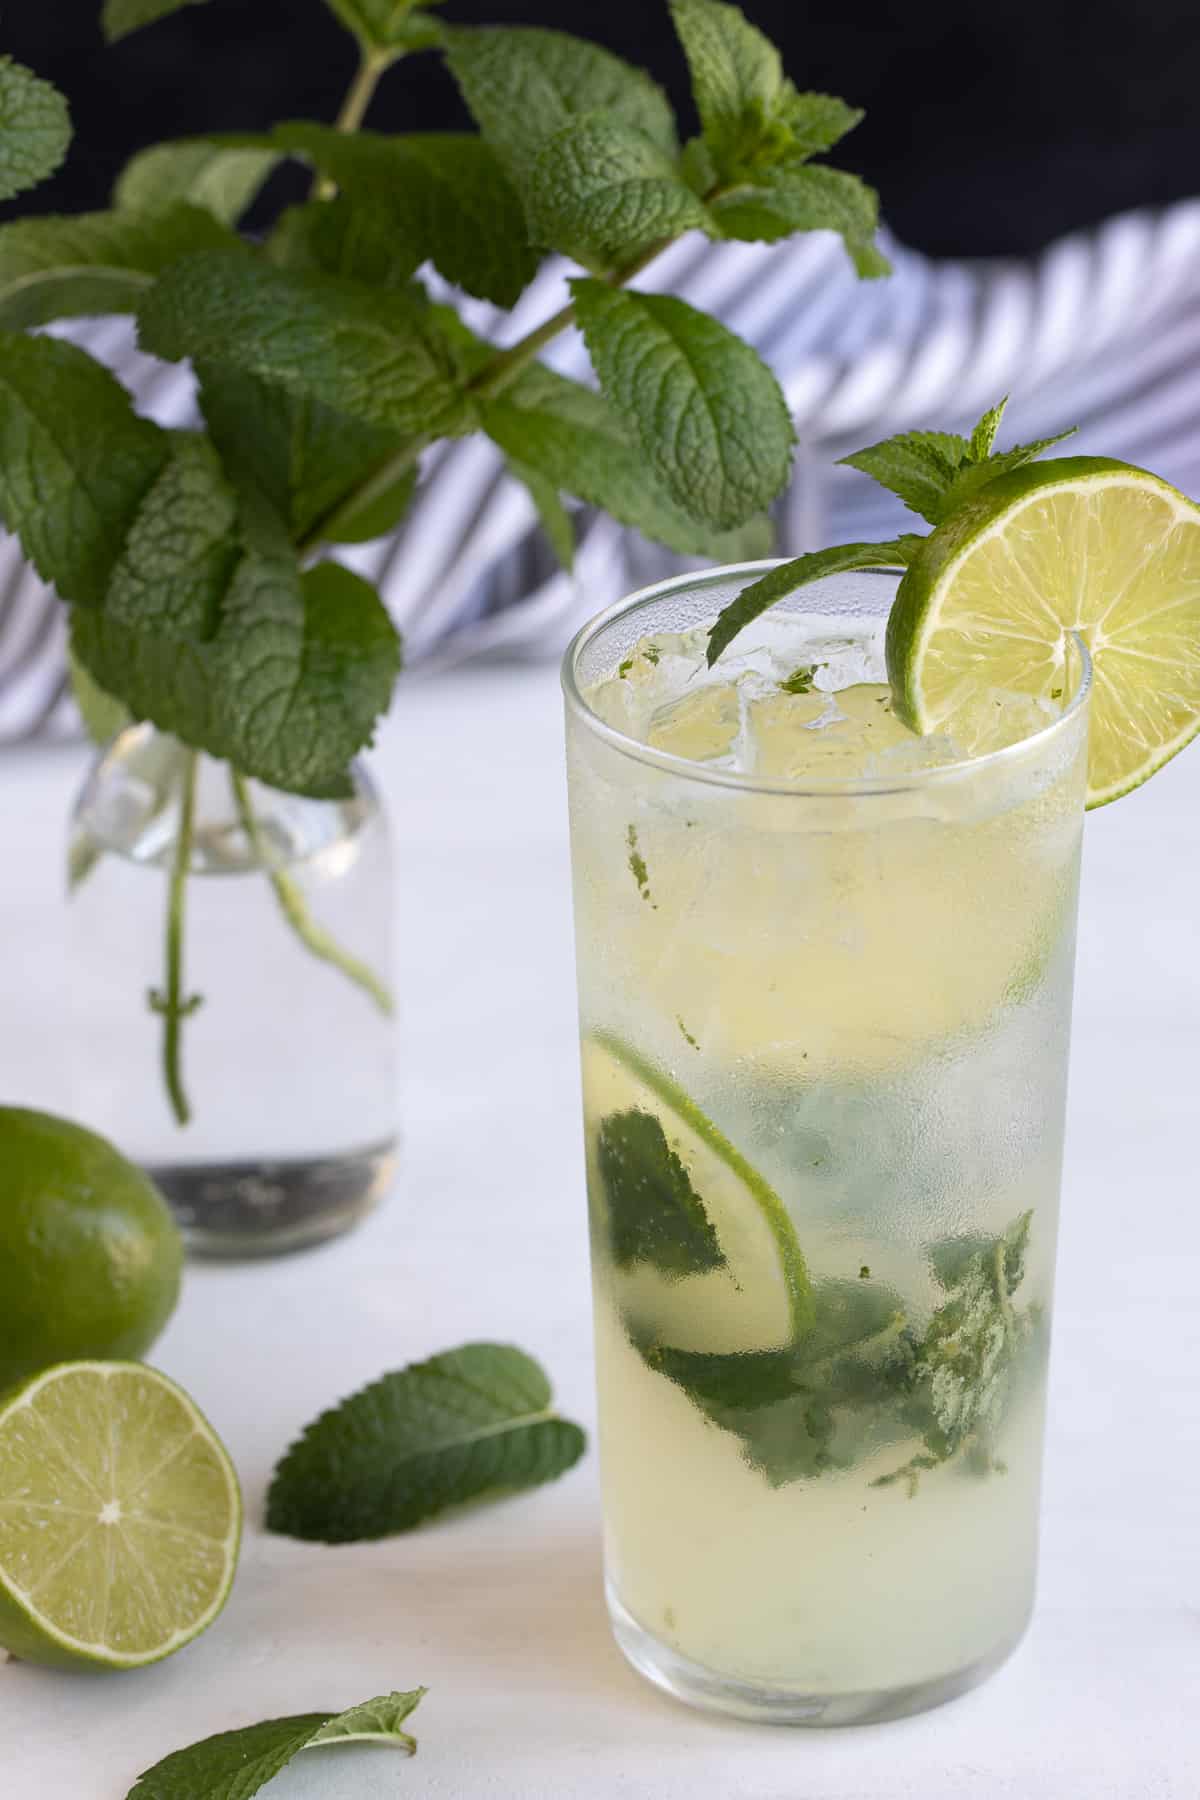 A garnished mojito in a glass.  Limes and a vase of mint are in the background.